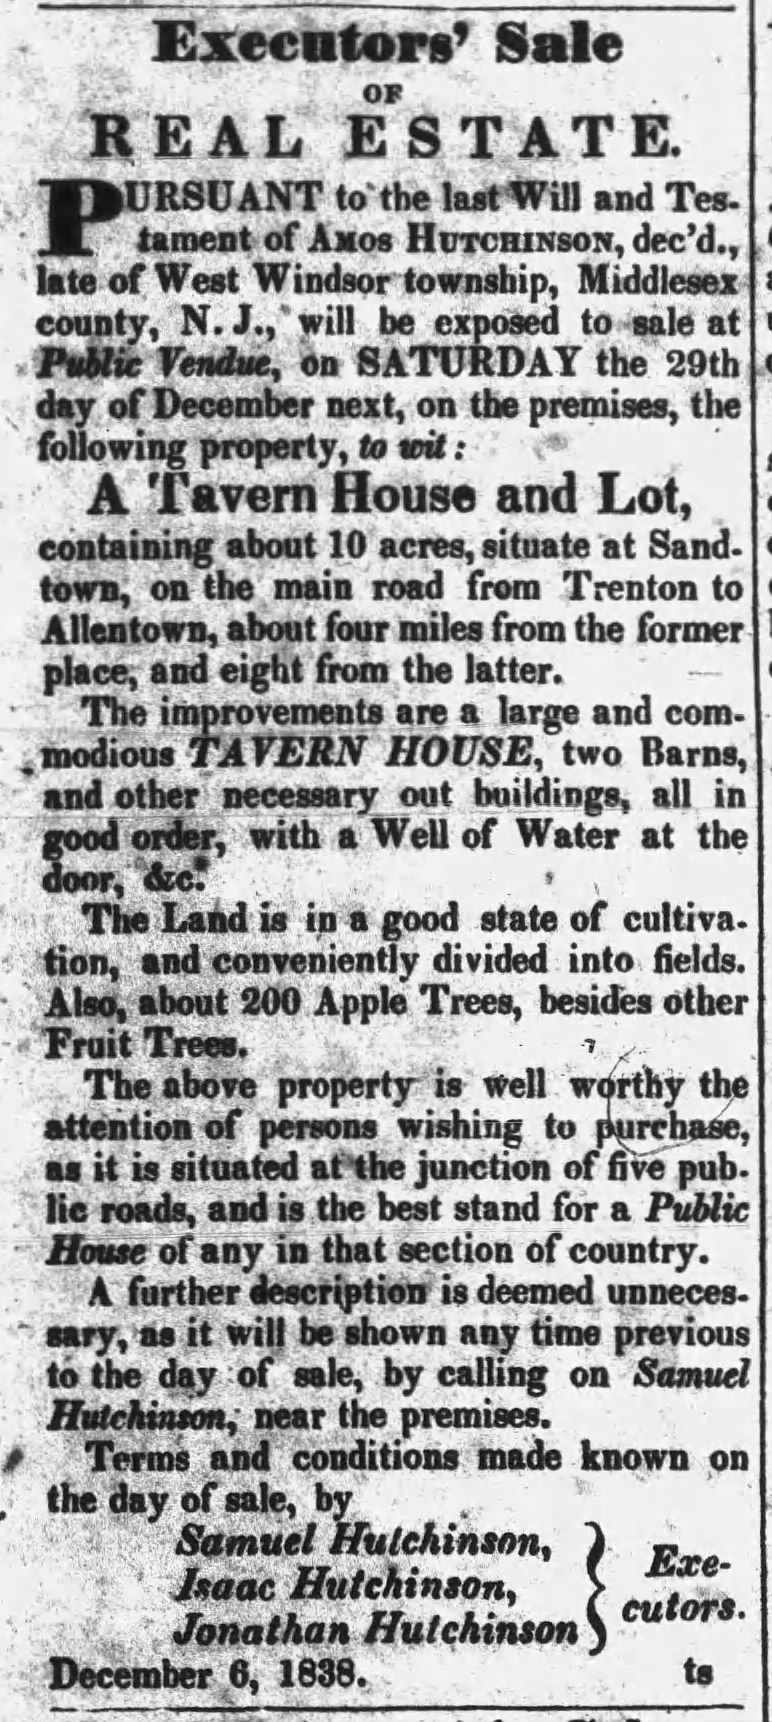 1838 An estate sale was held for Amos Hutchinson of West Windsor, New Jersey.